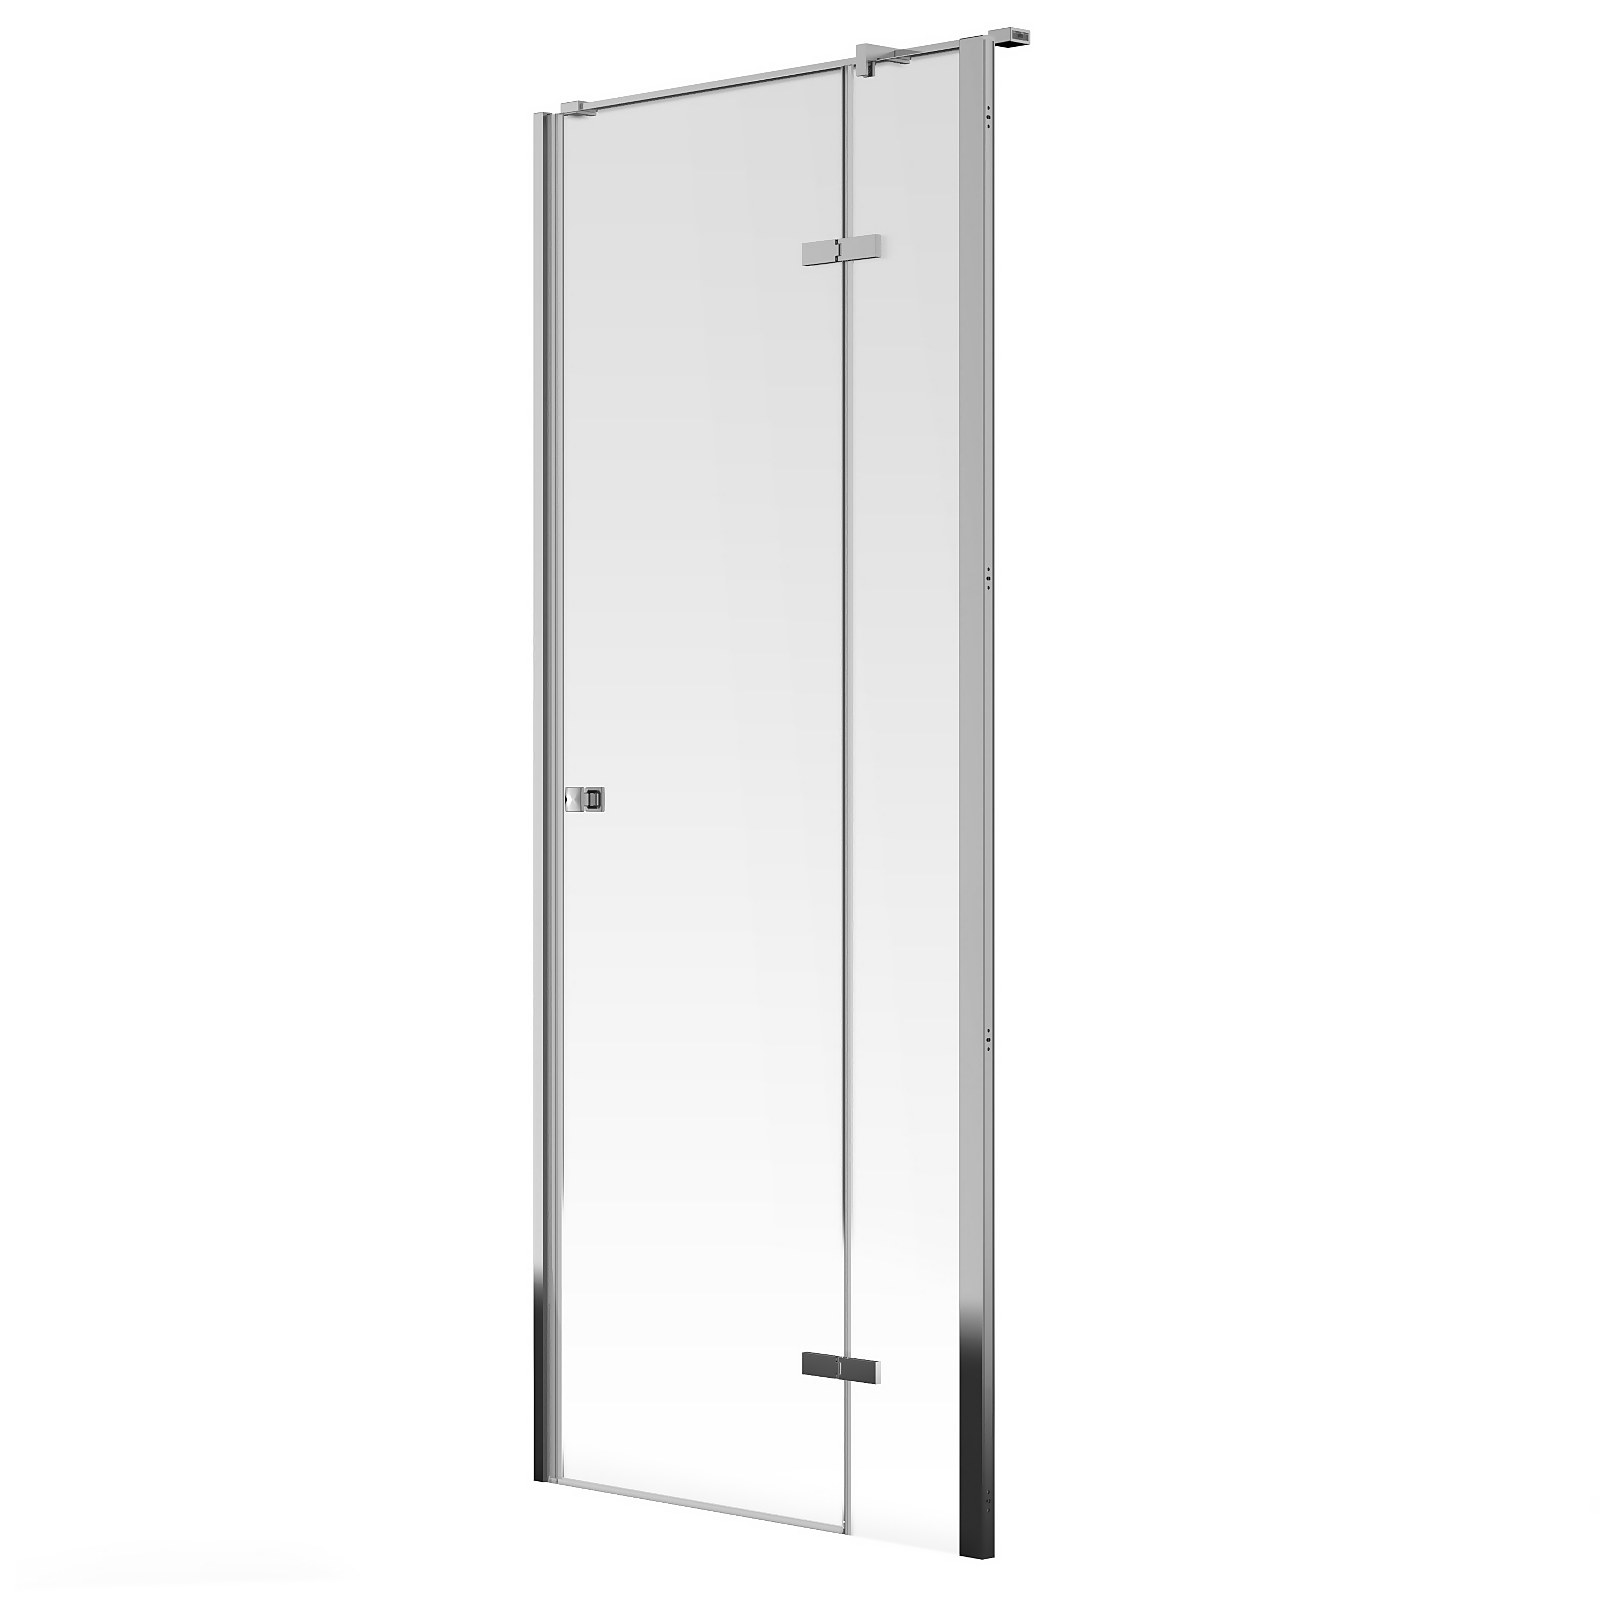 Photo of Bathstore Pearl 800mm Hinged Shower Glass Door - Right Hand